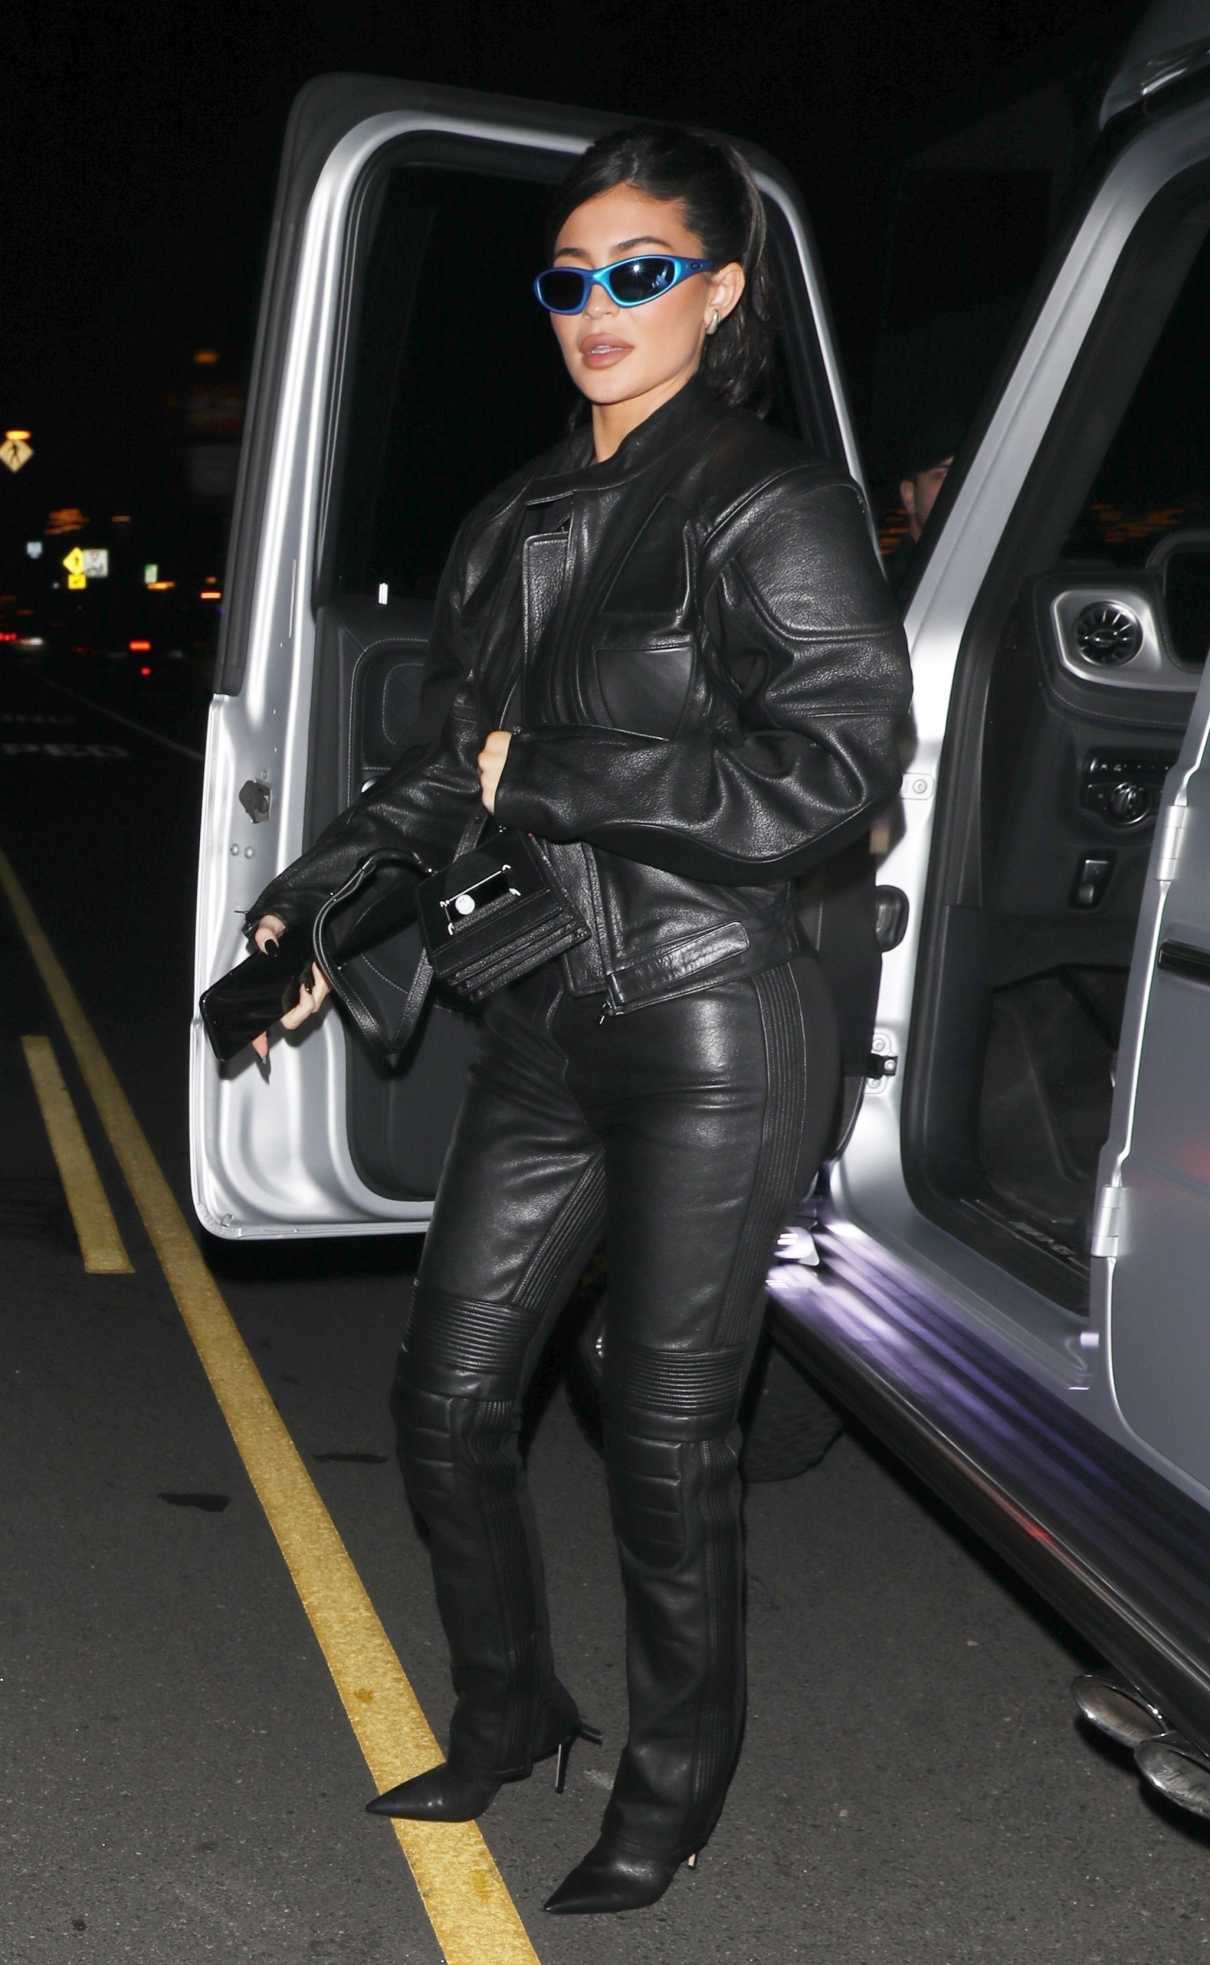 Kylie Jenner in a Black Leather Outfit